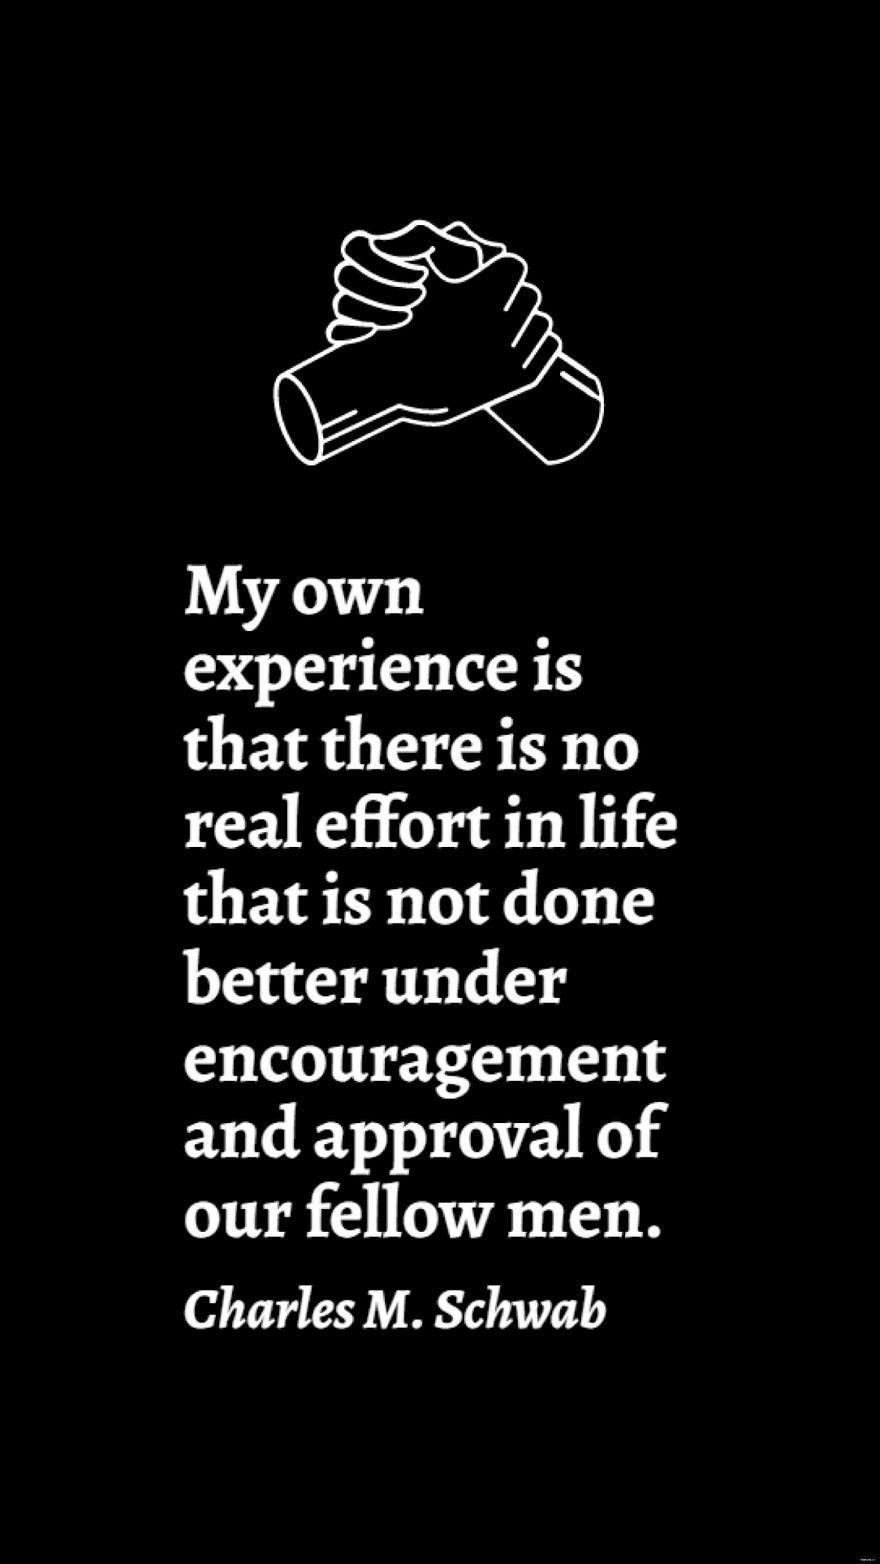 Free Charles M. Schwab - My own experience is that there is no real effort in life that is not done better under encouragement and approval of our fellow men. in JPG